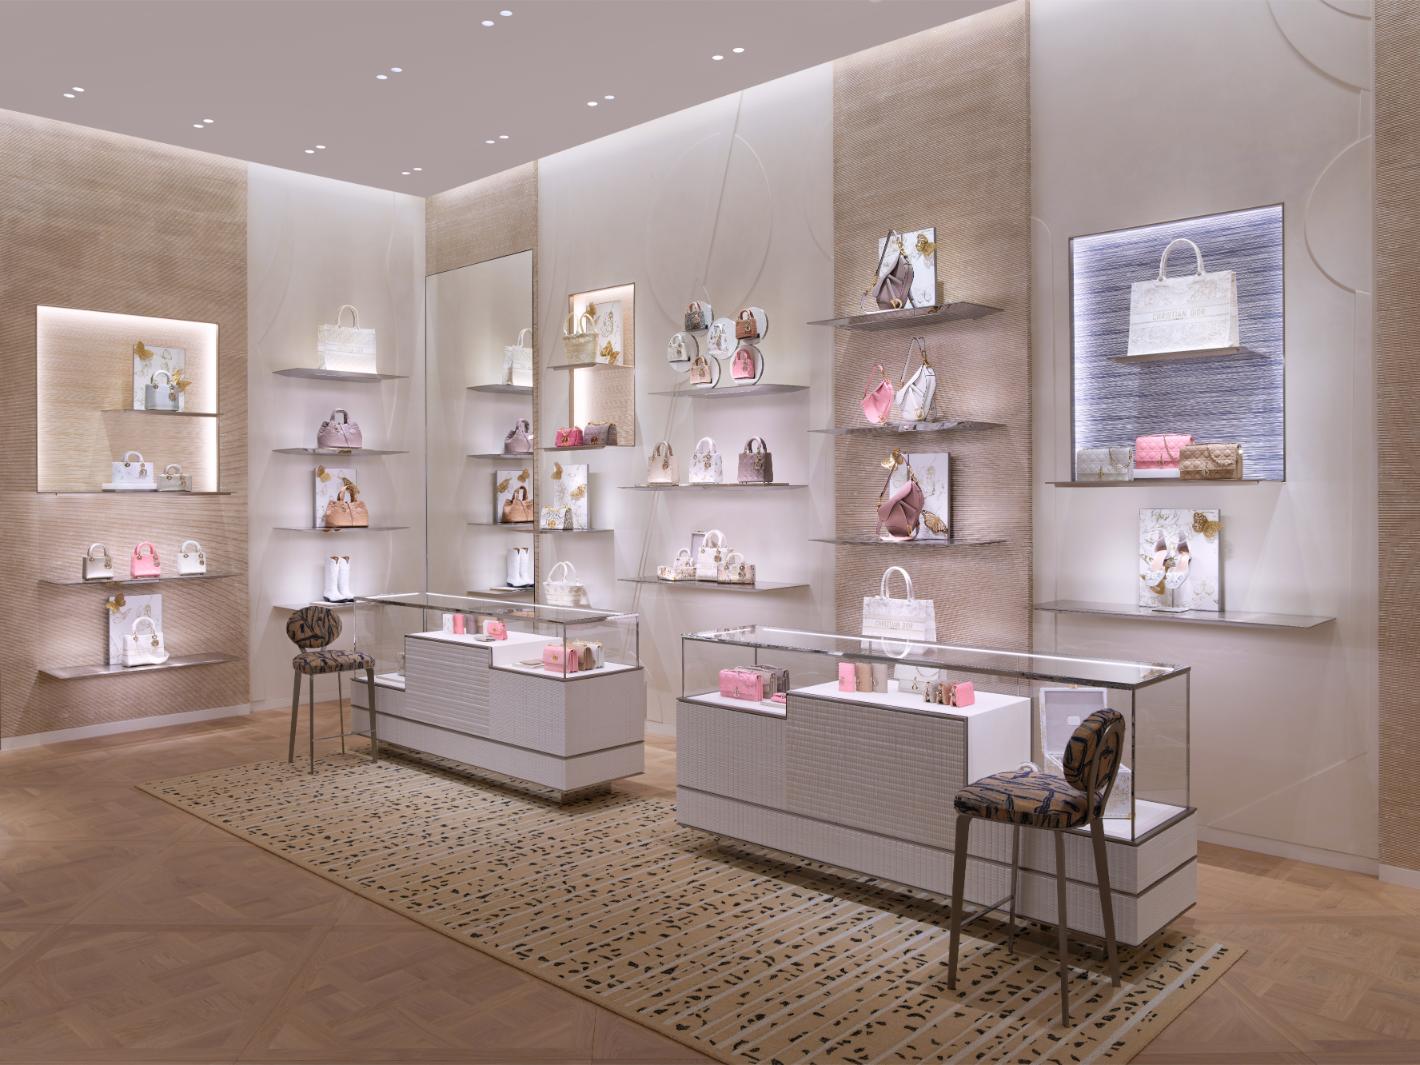 Dior Unveils New-Look Boutique In Mall Of The Emirates - A&E Magazine